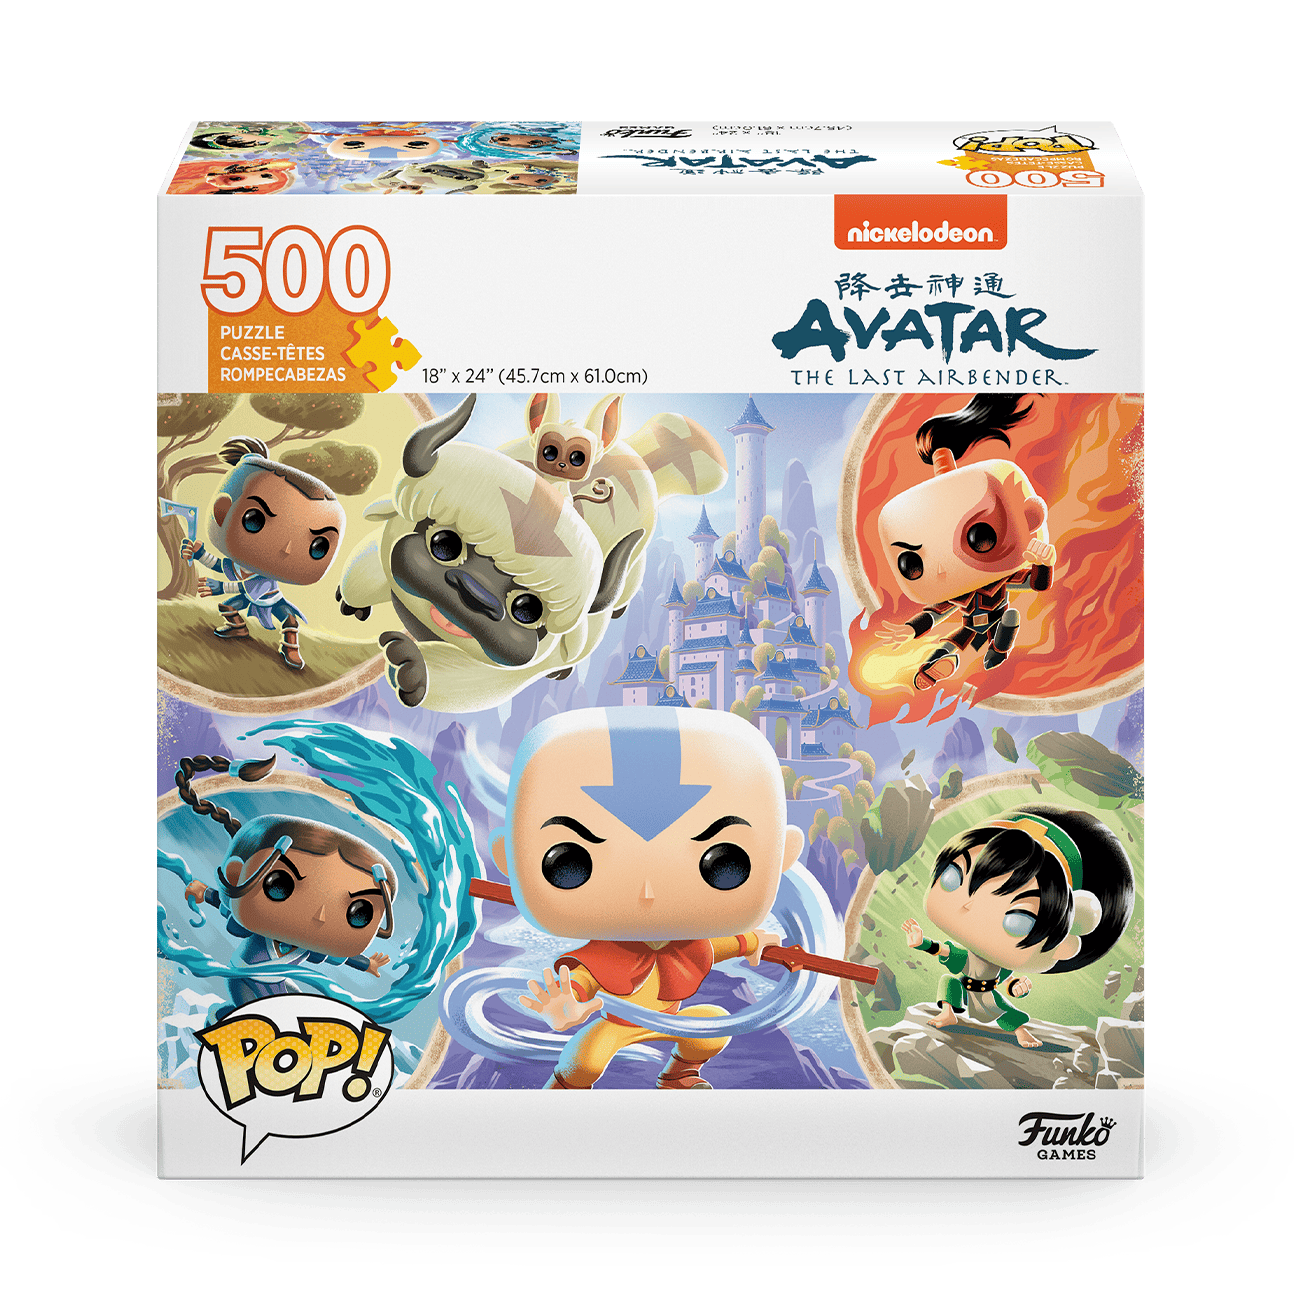 Rendezvous Danser Sui Buy Pop! Avatar: The Last Airbender Puzzle at Funko.